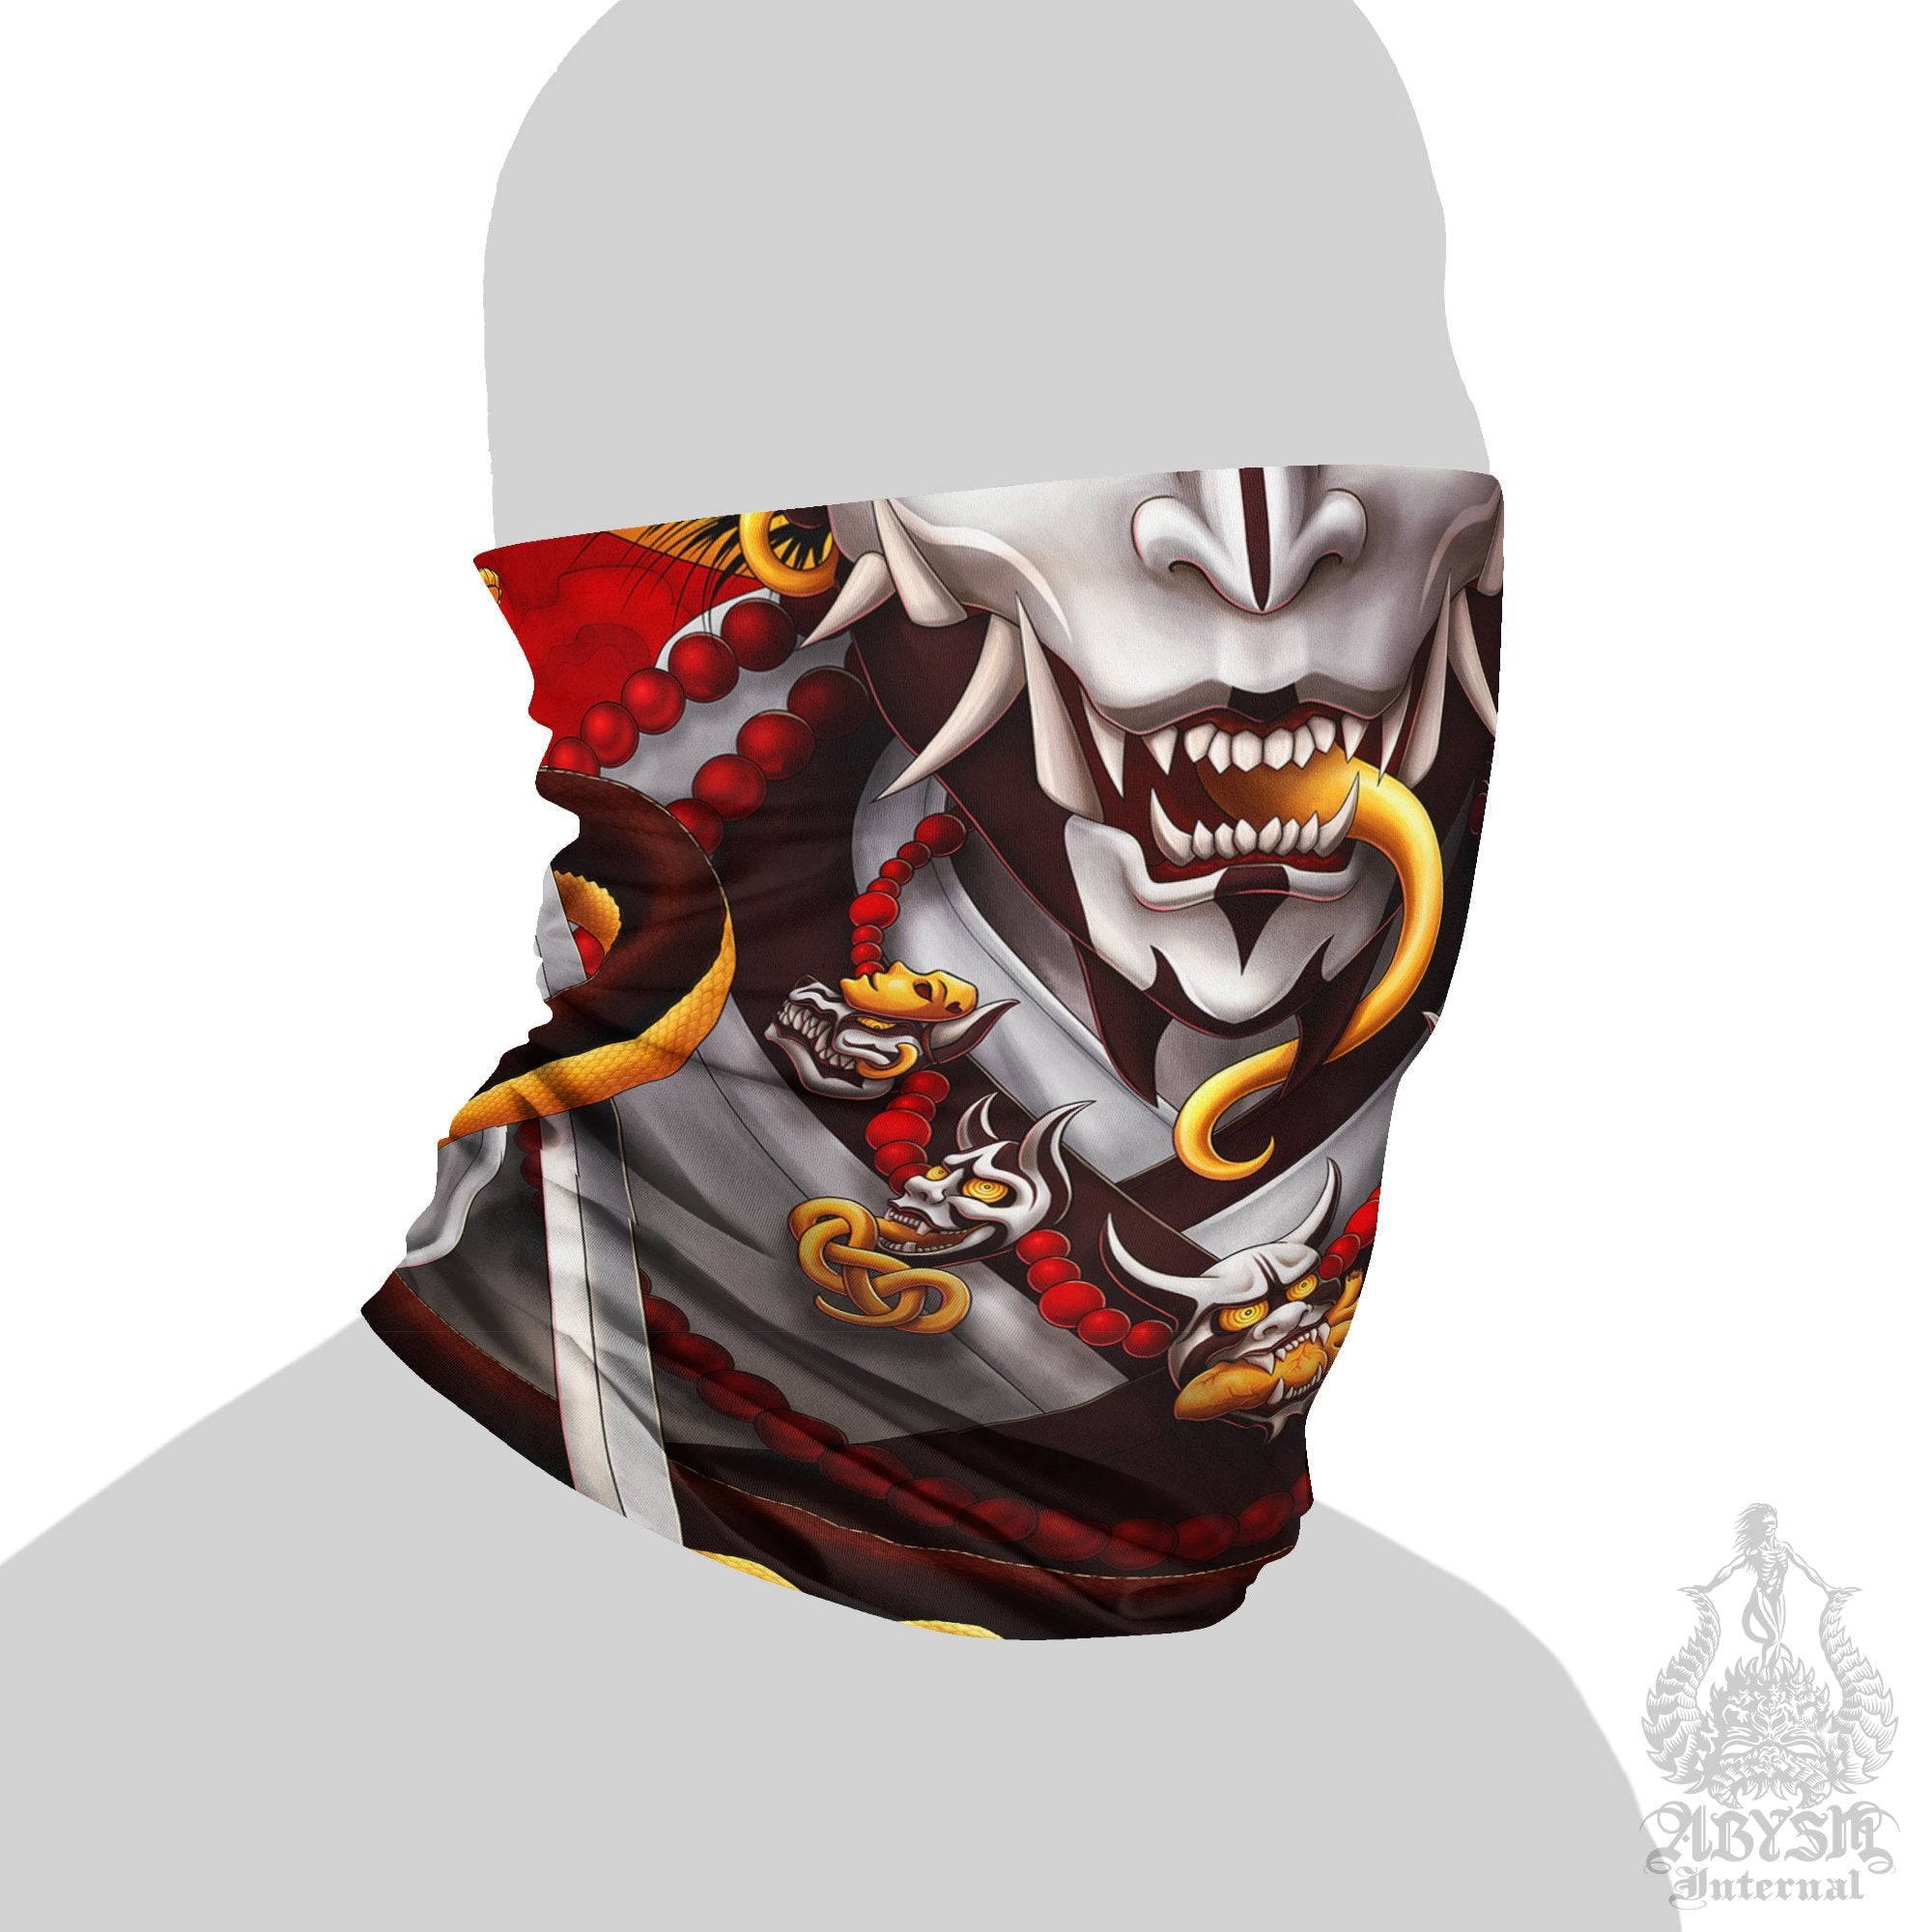 Hannya Neck Gaiter, Demon Face Mask, Japanese Oni Printed Head Covering, Cyclist Street Outfit, Snake, Fangs, Headband - Original - Abysm Internal